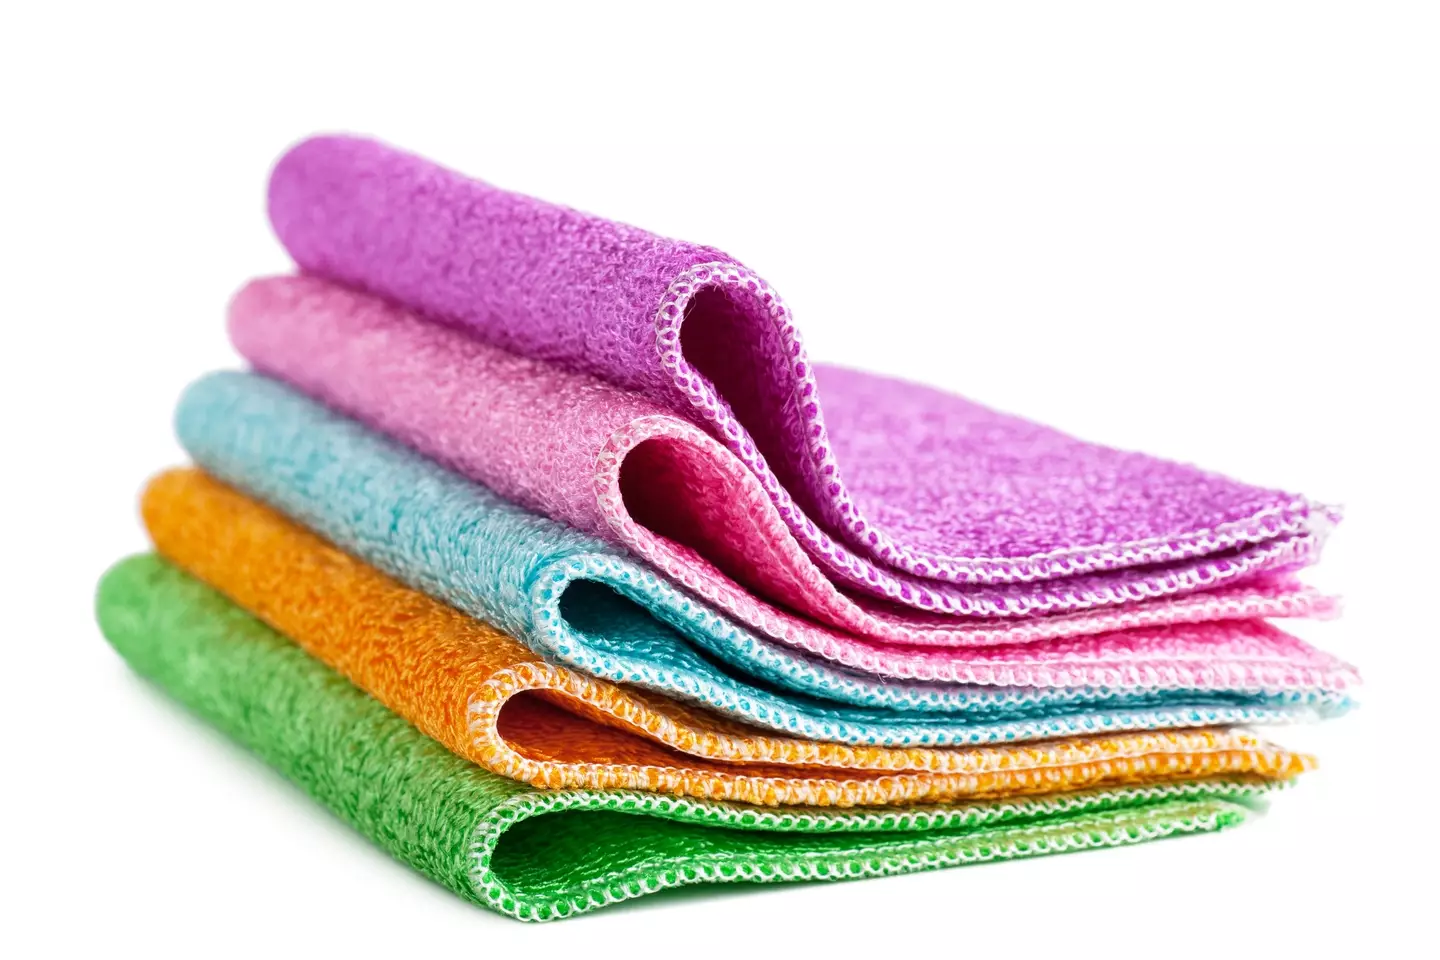 You can get a multi-pack of microfibre clothes for a little over 50p each.